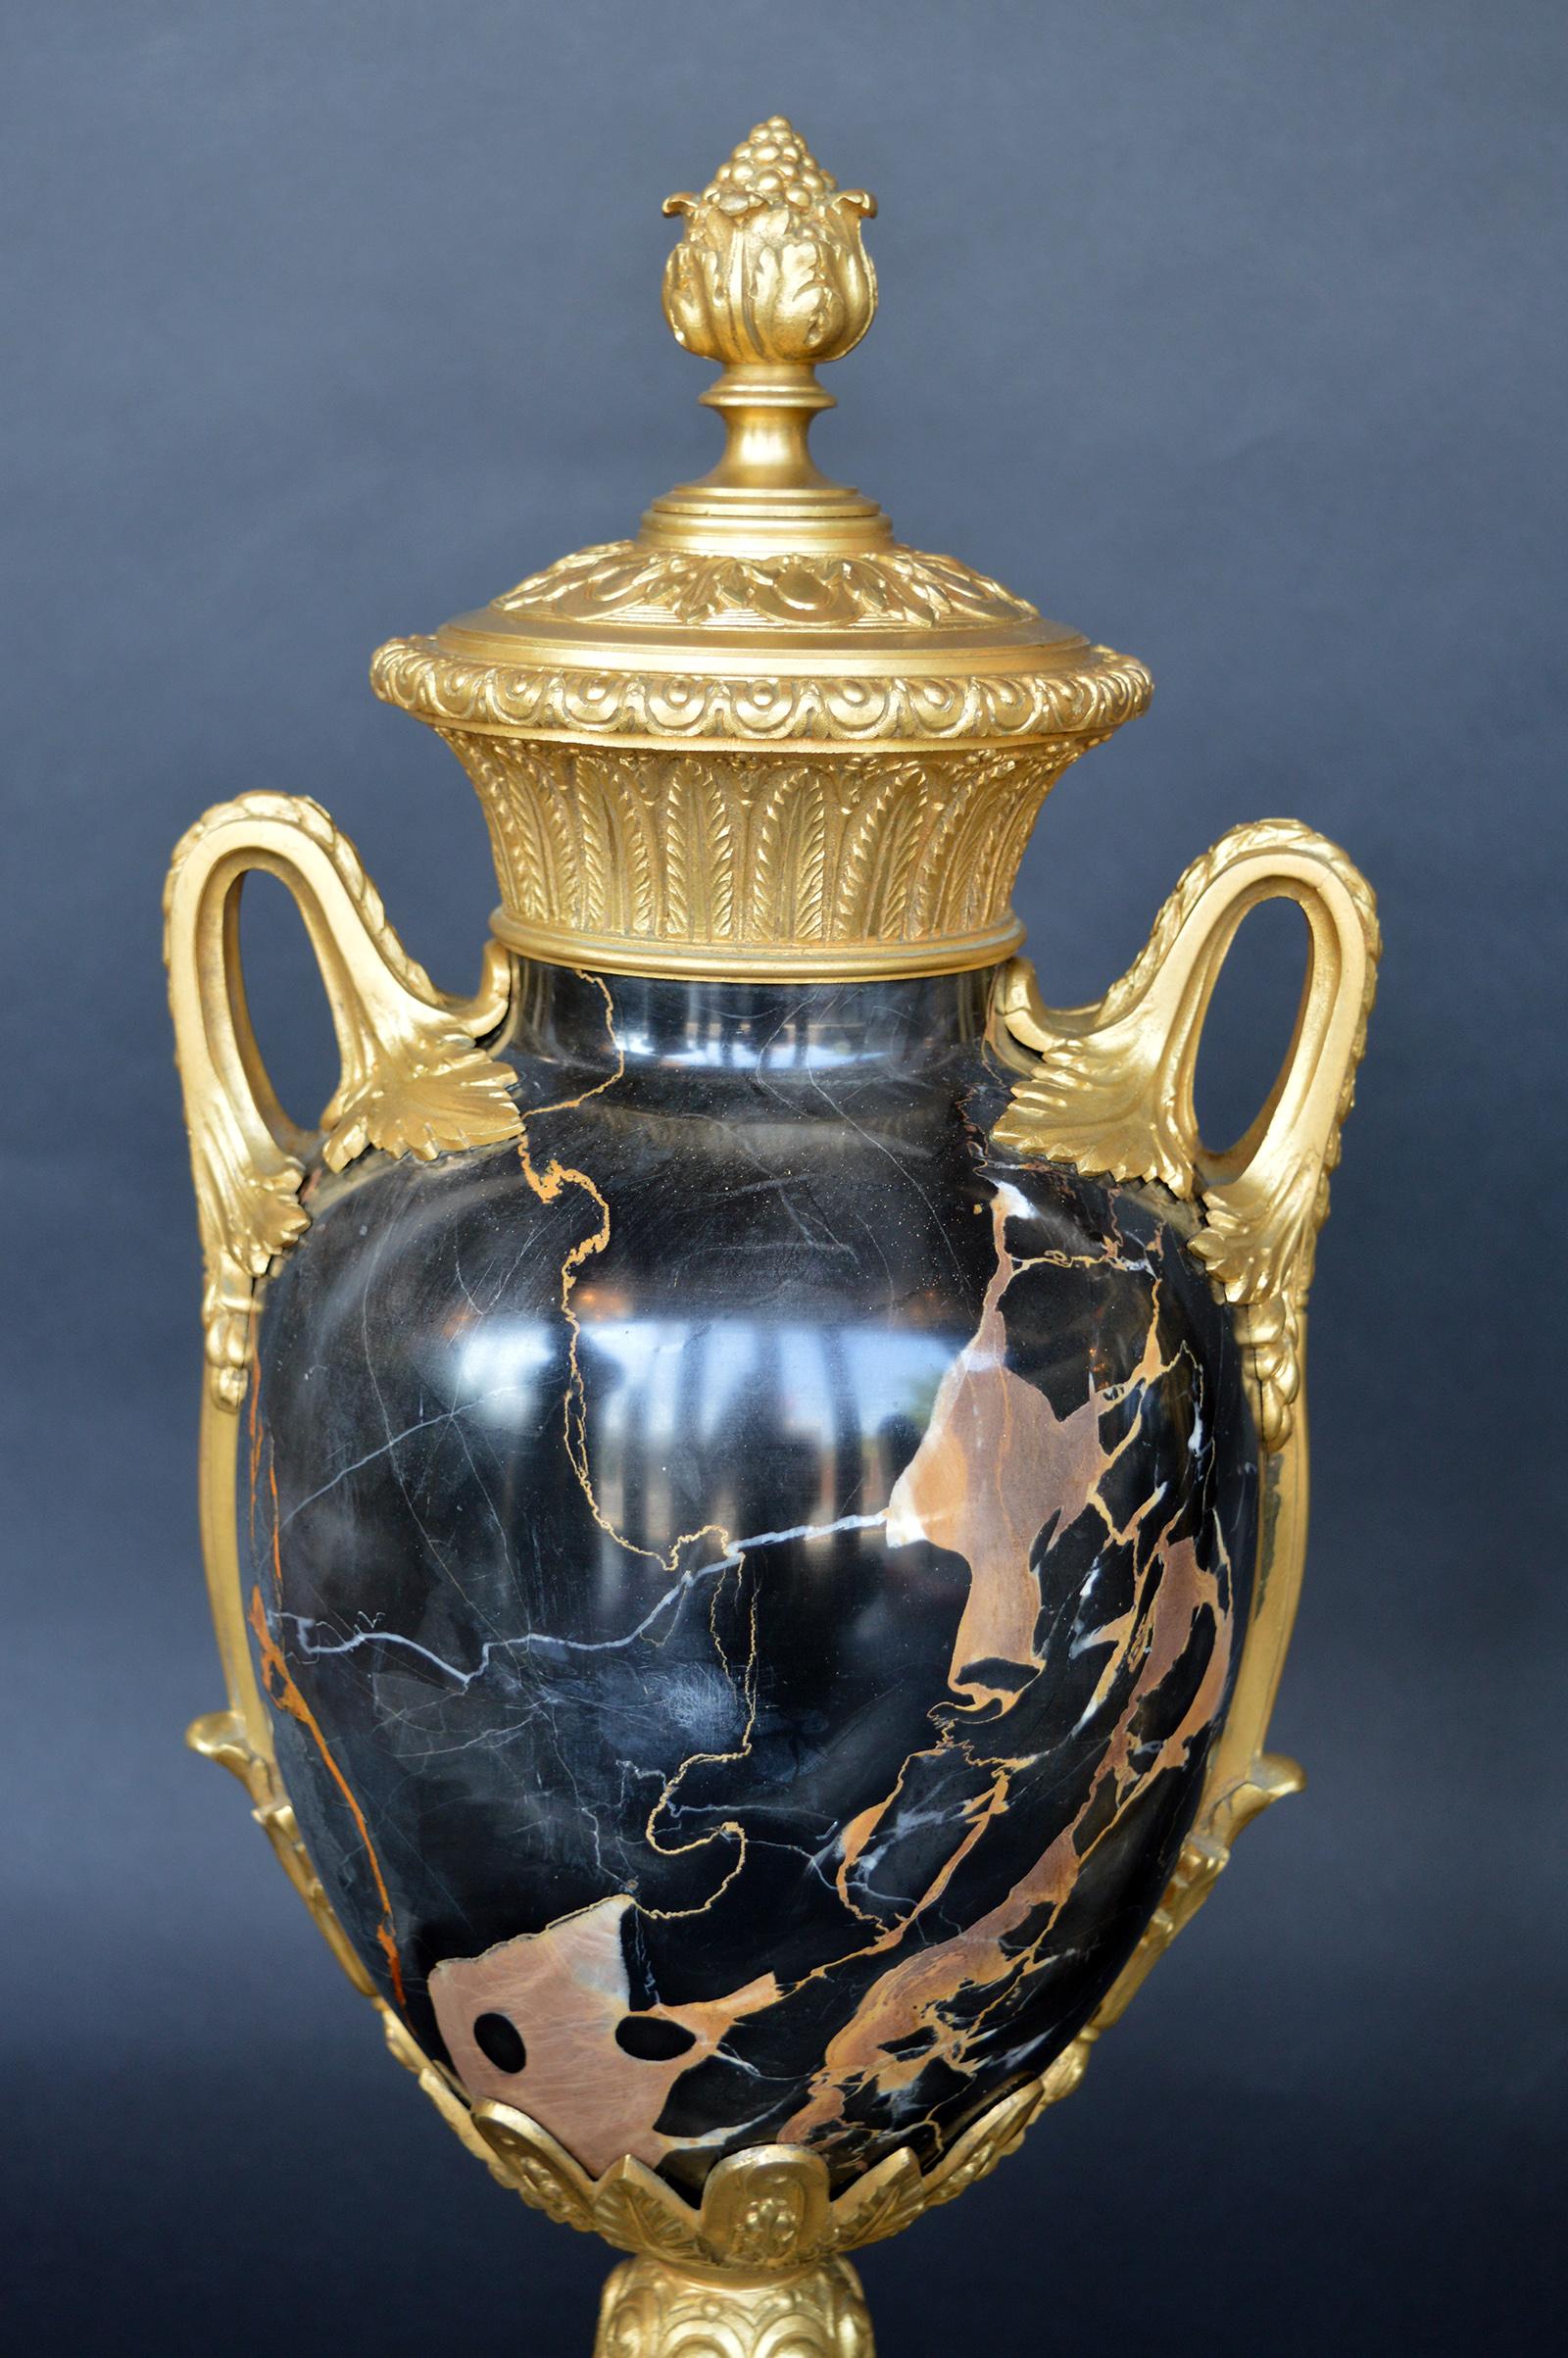 Gold and black marble set in bronze. Italian.